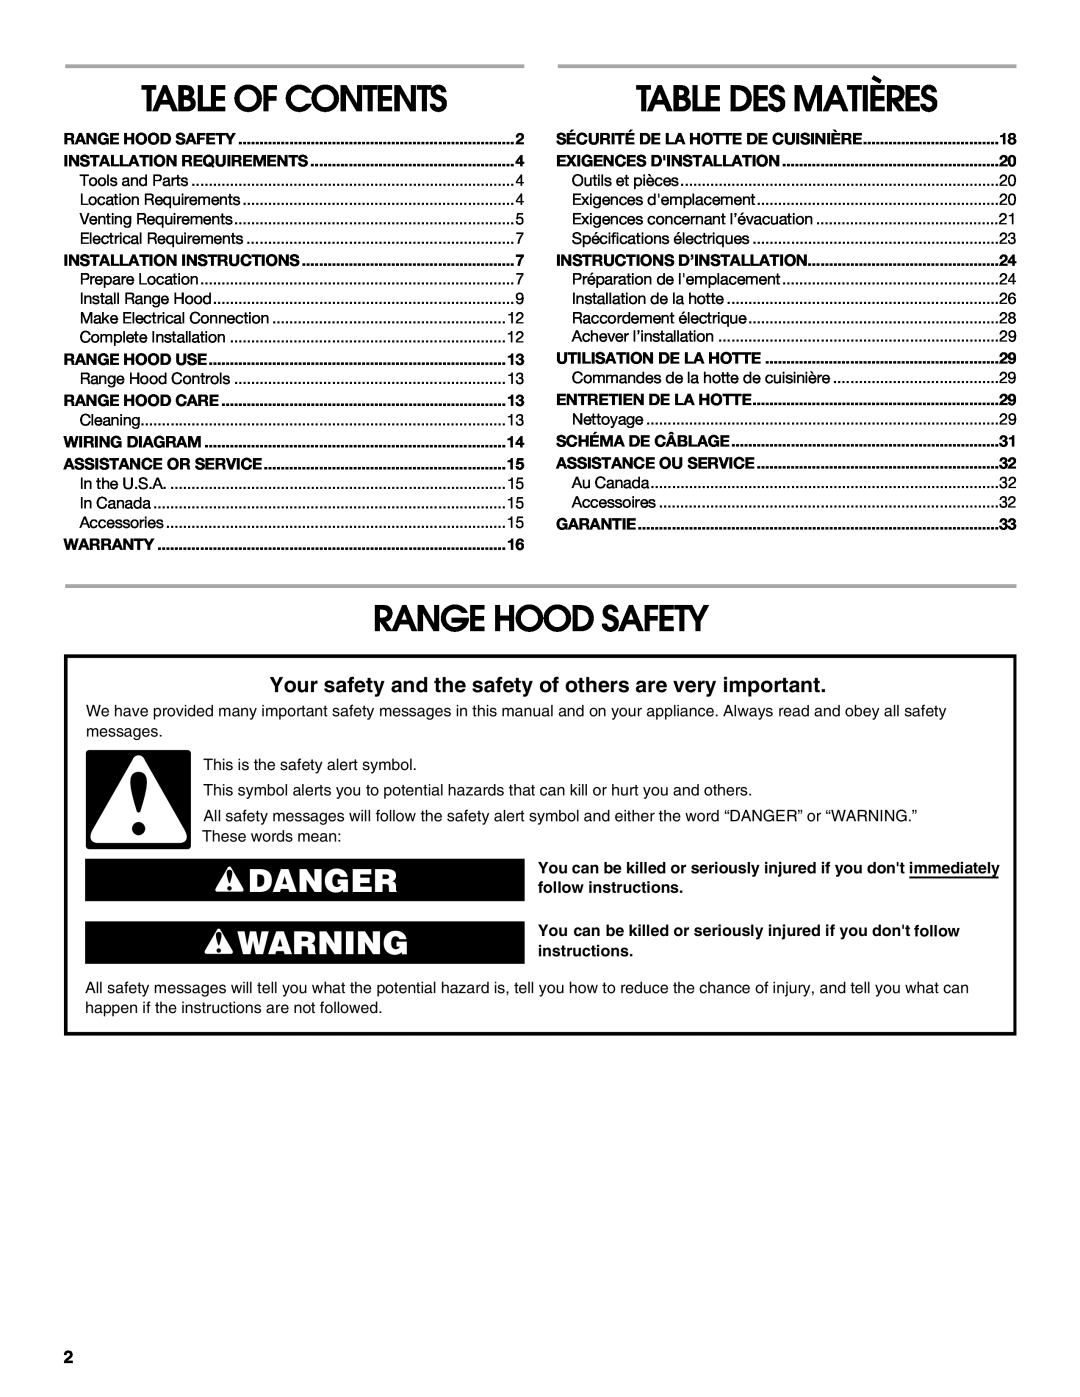 Whirlpool UXT4236AD Range Hood Safety, Danger, Table Of Contents, Installation Requirements, Installation Instructions 